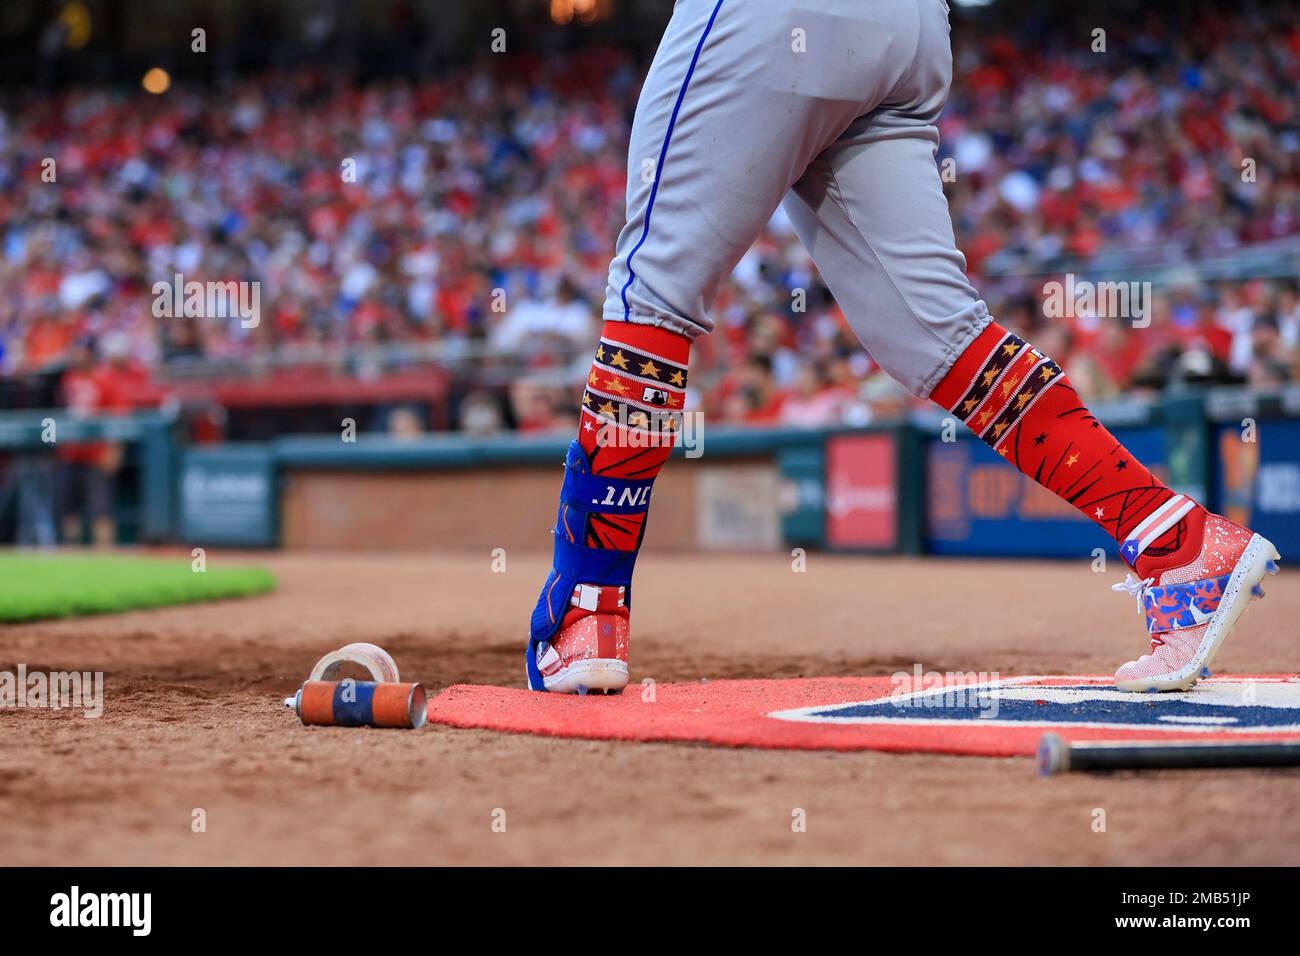 The Stance socks and New Balance cleats worn by New York Mets' Francisco  Lindor are seen as he stands on the dugout steps during a baseball game  against the Cincinnati Reds in